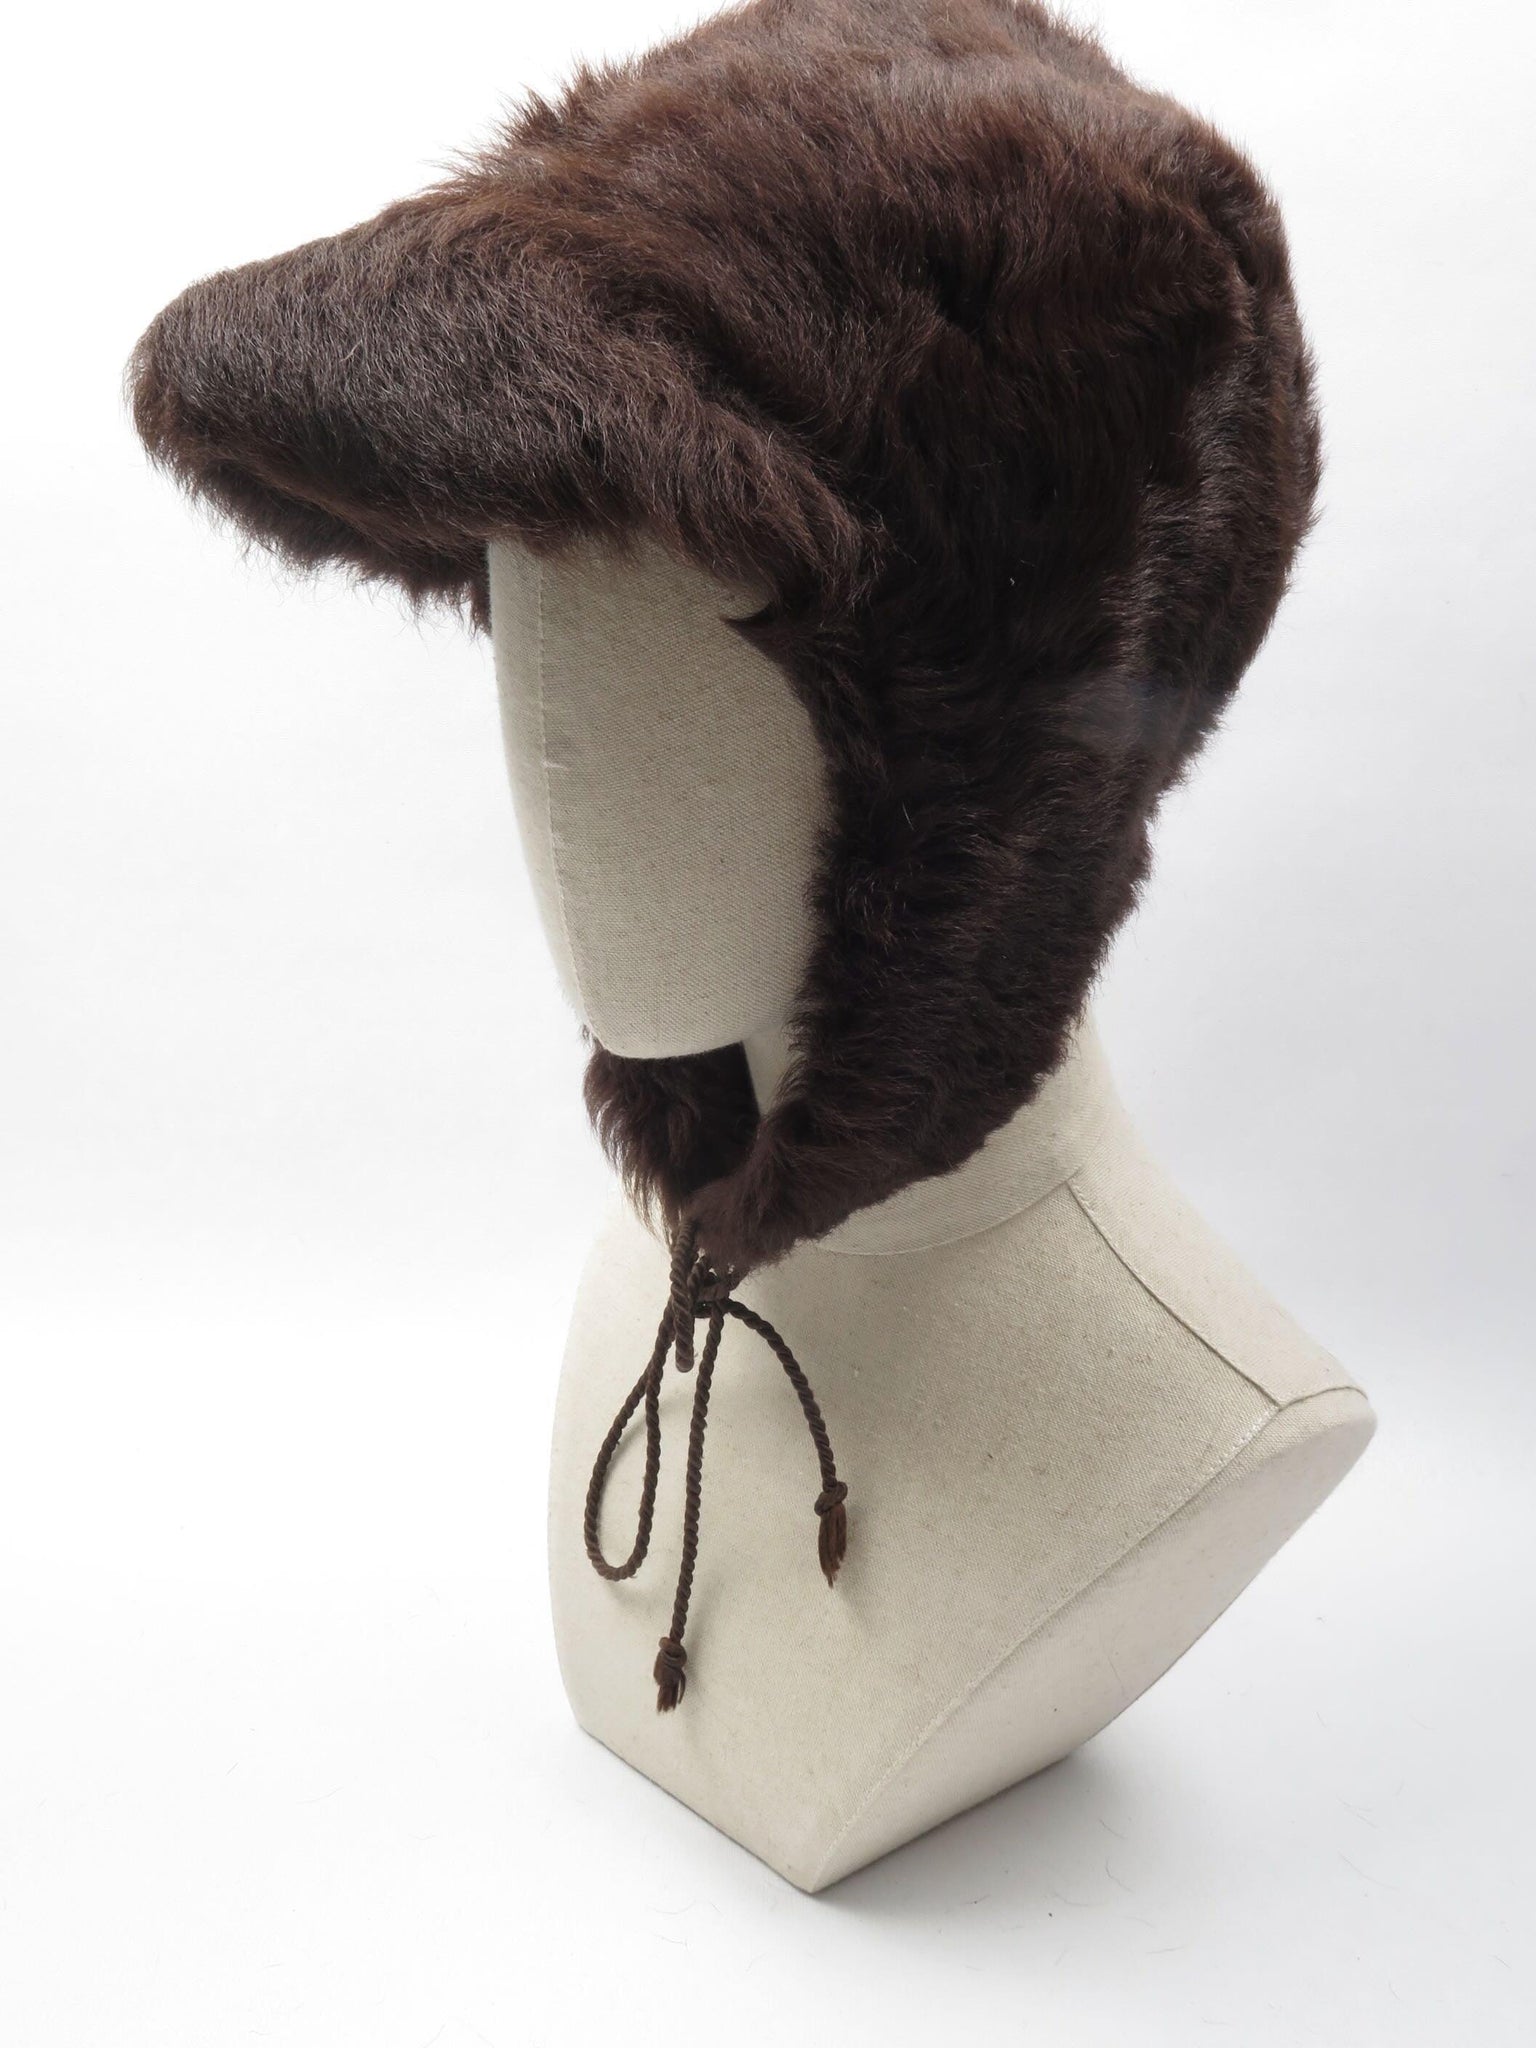 1960s Sheepskin Trapper Style Hat - The Harlequin